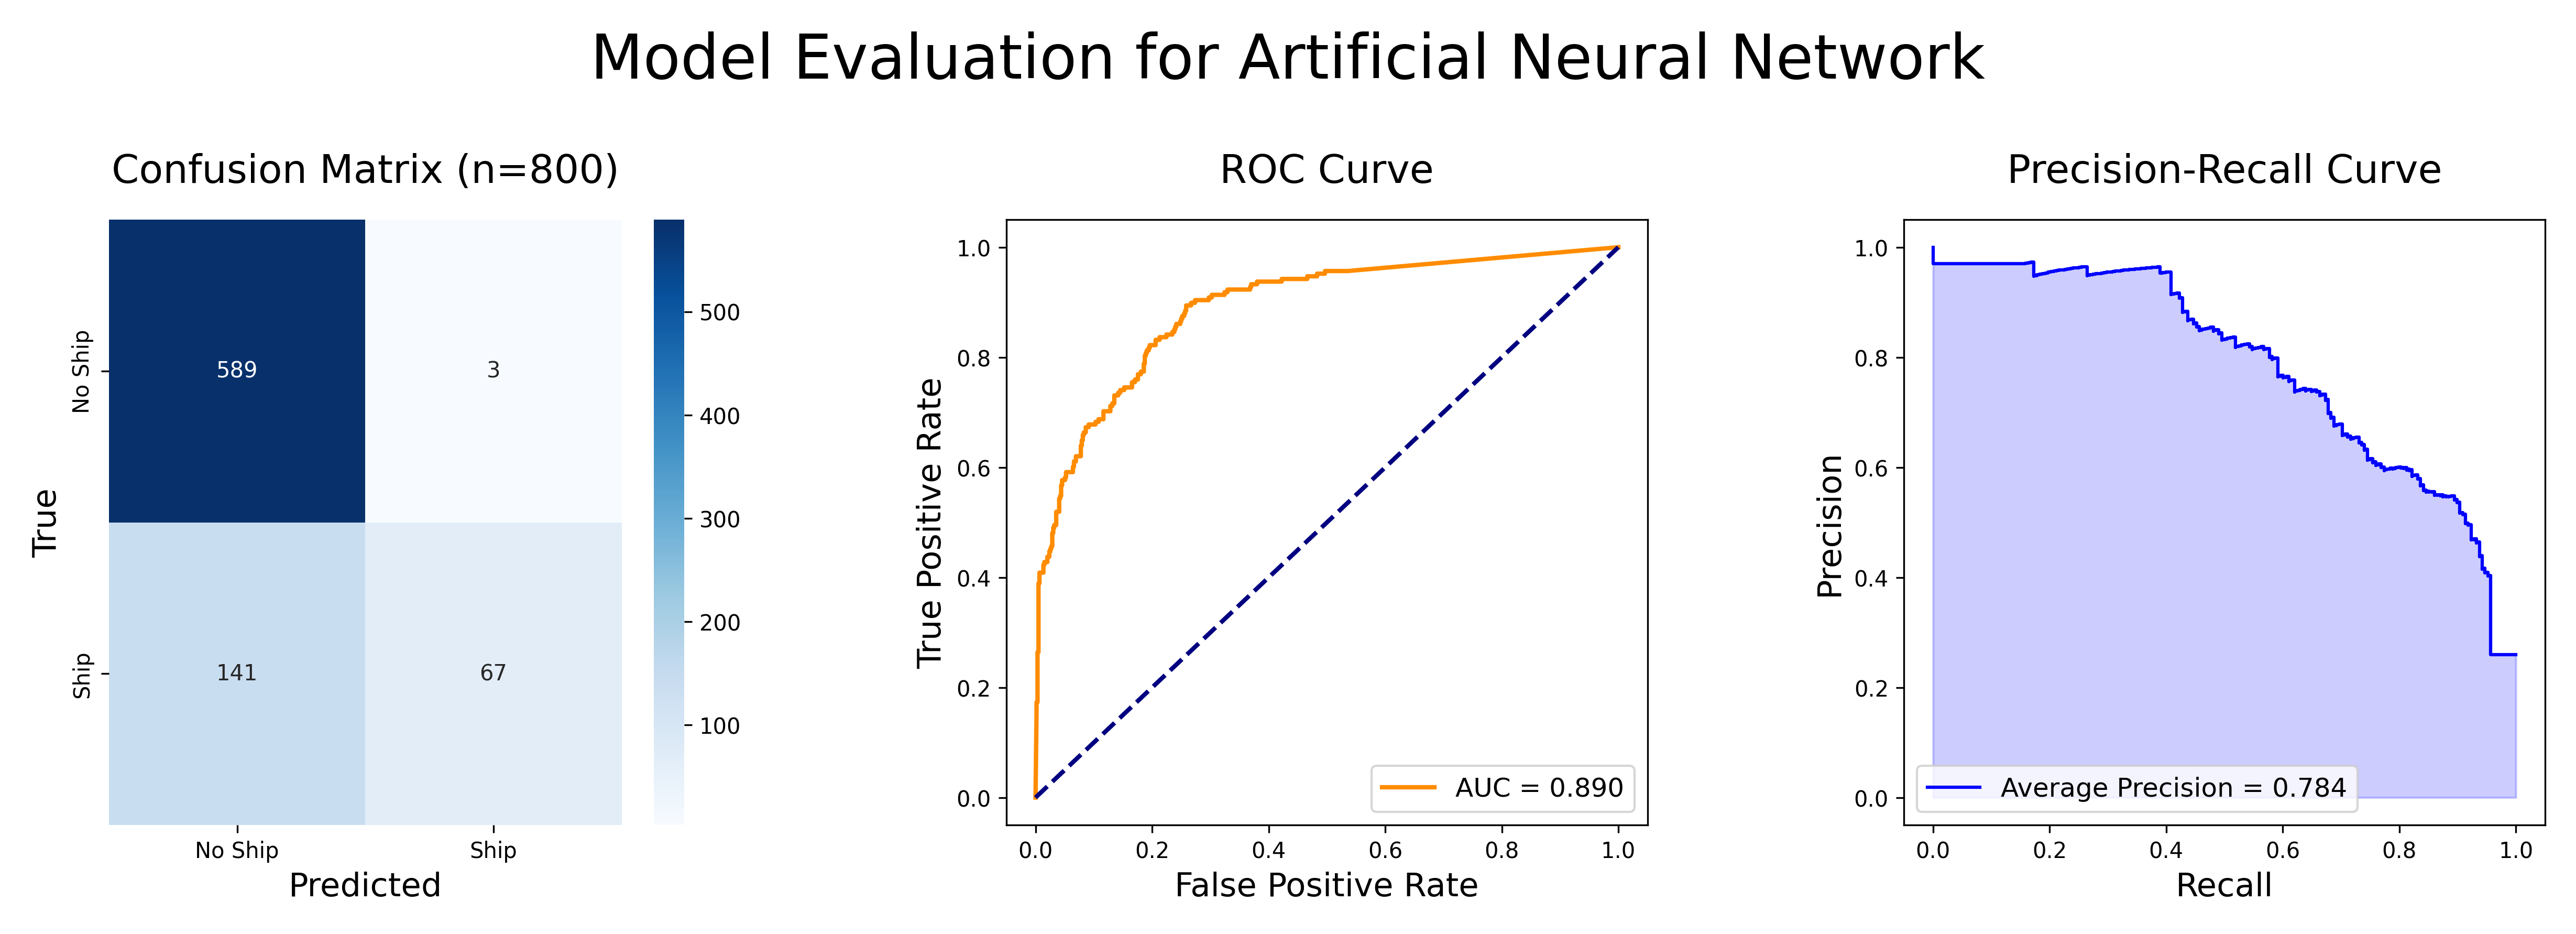 Model Evaluation for Artificial Neural Network